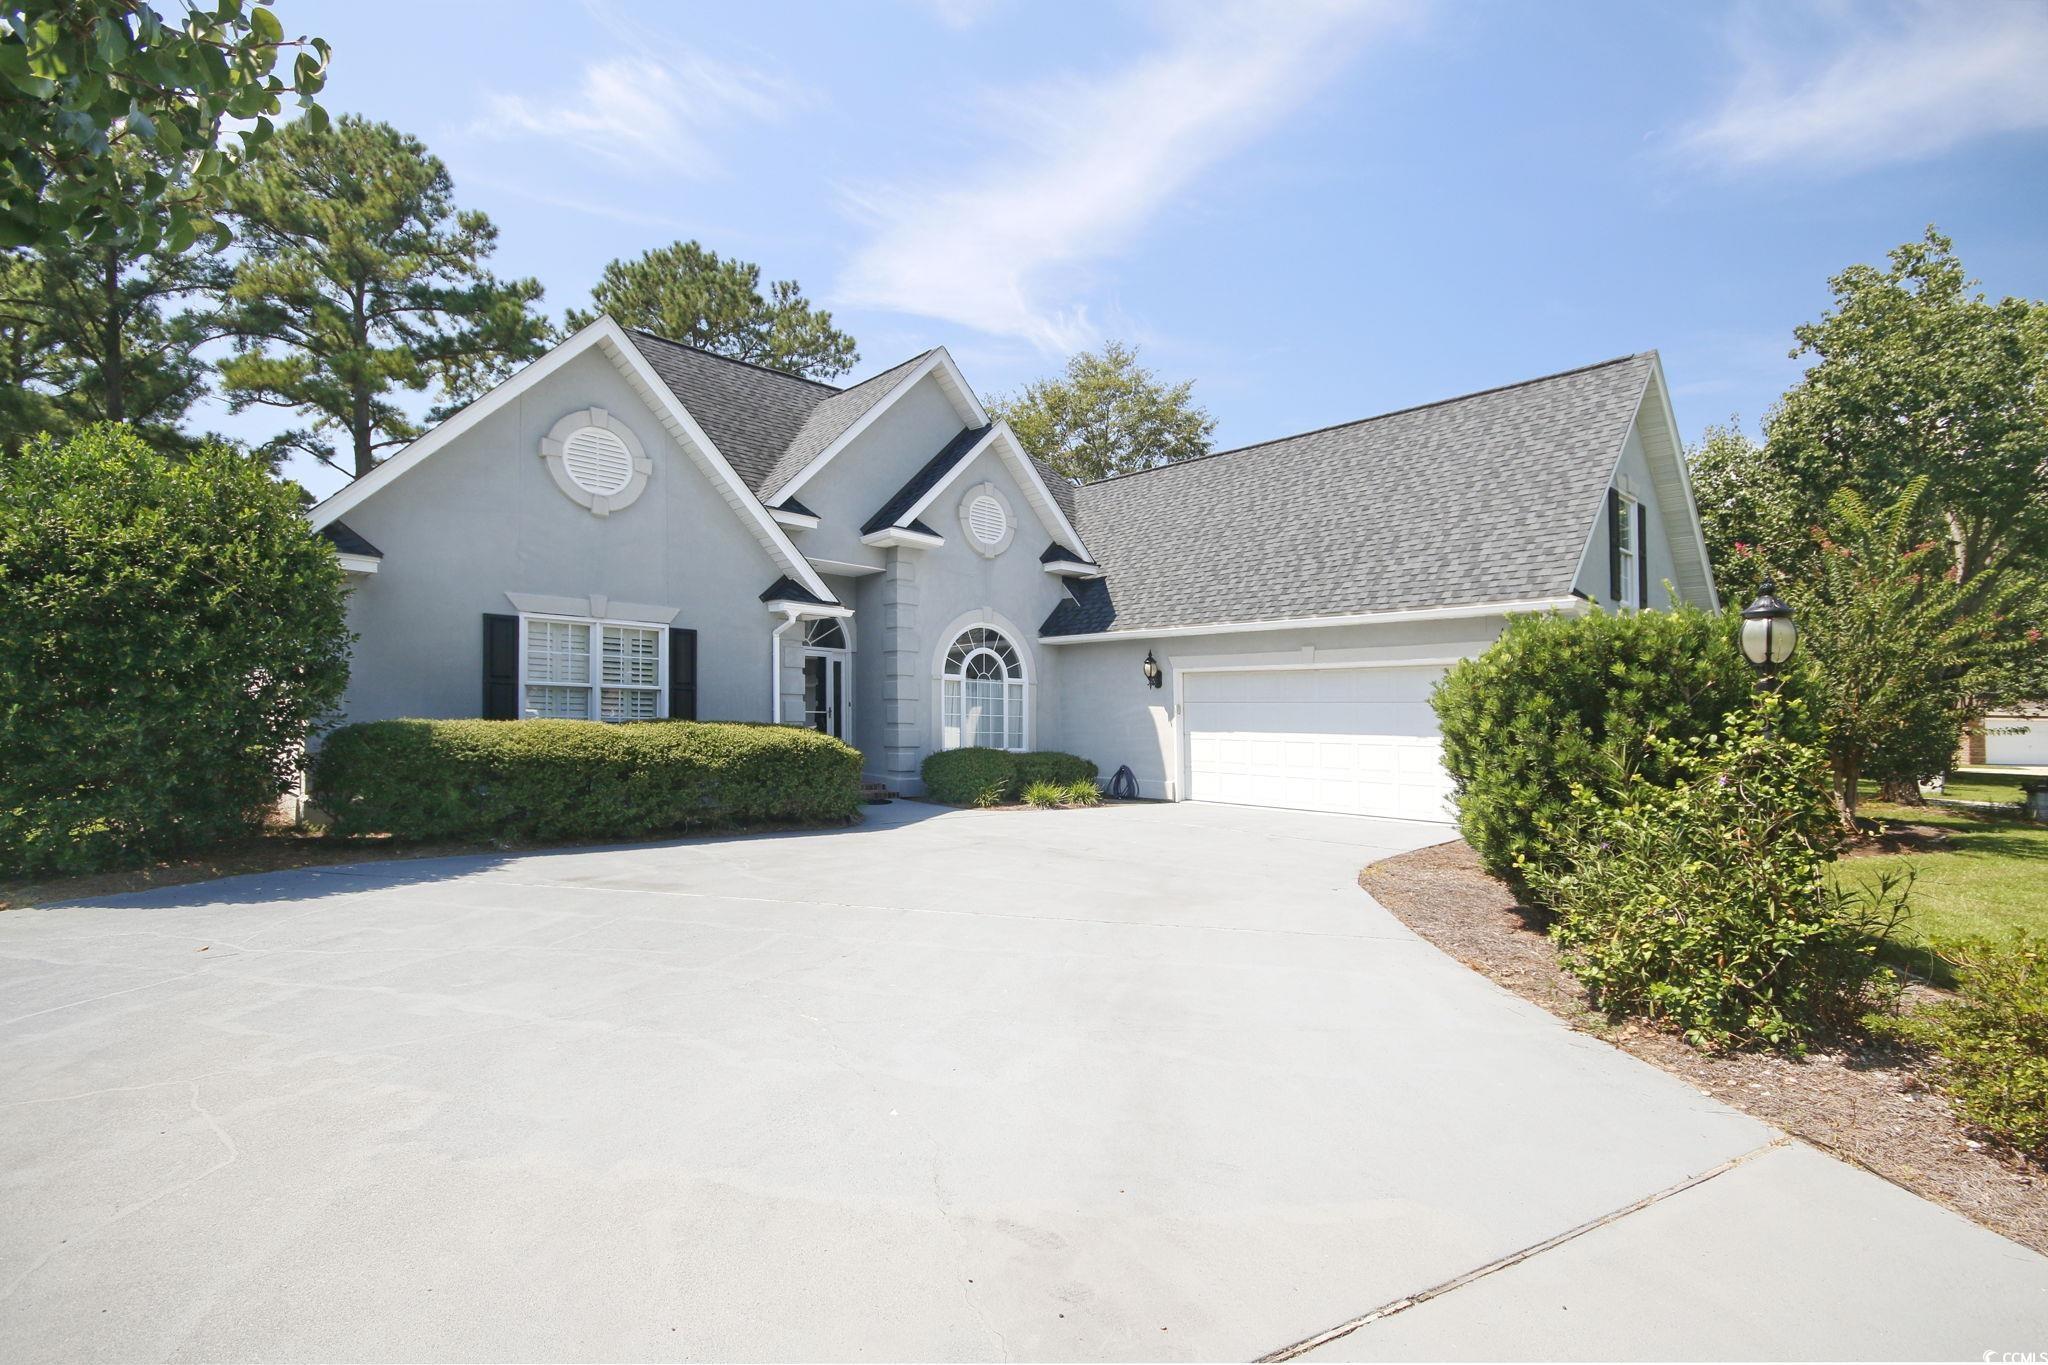 are you looking for a picturesque home, in the golf course community of wedgefield plantation, with 3 bedrooms 2 and 1/2 bath with two bonus rooms? well look no further! 75 haig court is ready for you, having all bedrooms and bath on the main level, so stairs do not have to be a problem! this home also comes with peace of mind, as it is a sc safe home. this home has been very well maintained with a newer roof,  flooring and windows, which were replaced in 2016. the primary bedroom is in on the main level with trey ceilings, an en suite with jacuzzi tub, walk in shower and two walk in closets. the split bedroom floor plan has two additional guest rooms which share a jack and jill bathroom. in addition to a functional lay out, this home has two bonus rooms, with ample floored attic space! just off of the family room, is a 12 x 15 sun room and a nice 12 x 12 wooden deck overlooking the 2nd fairway.  what more are you looking for? the wedgefield community has golf membership options available, also offers a private boat landing with a dock on the black river where you have access to 5 rivers, and the intracoastal waterway. bring your things, let’s make 75 haig ct. your new home and start enjoying the laidback lowcountry lifestyle.